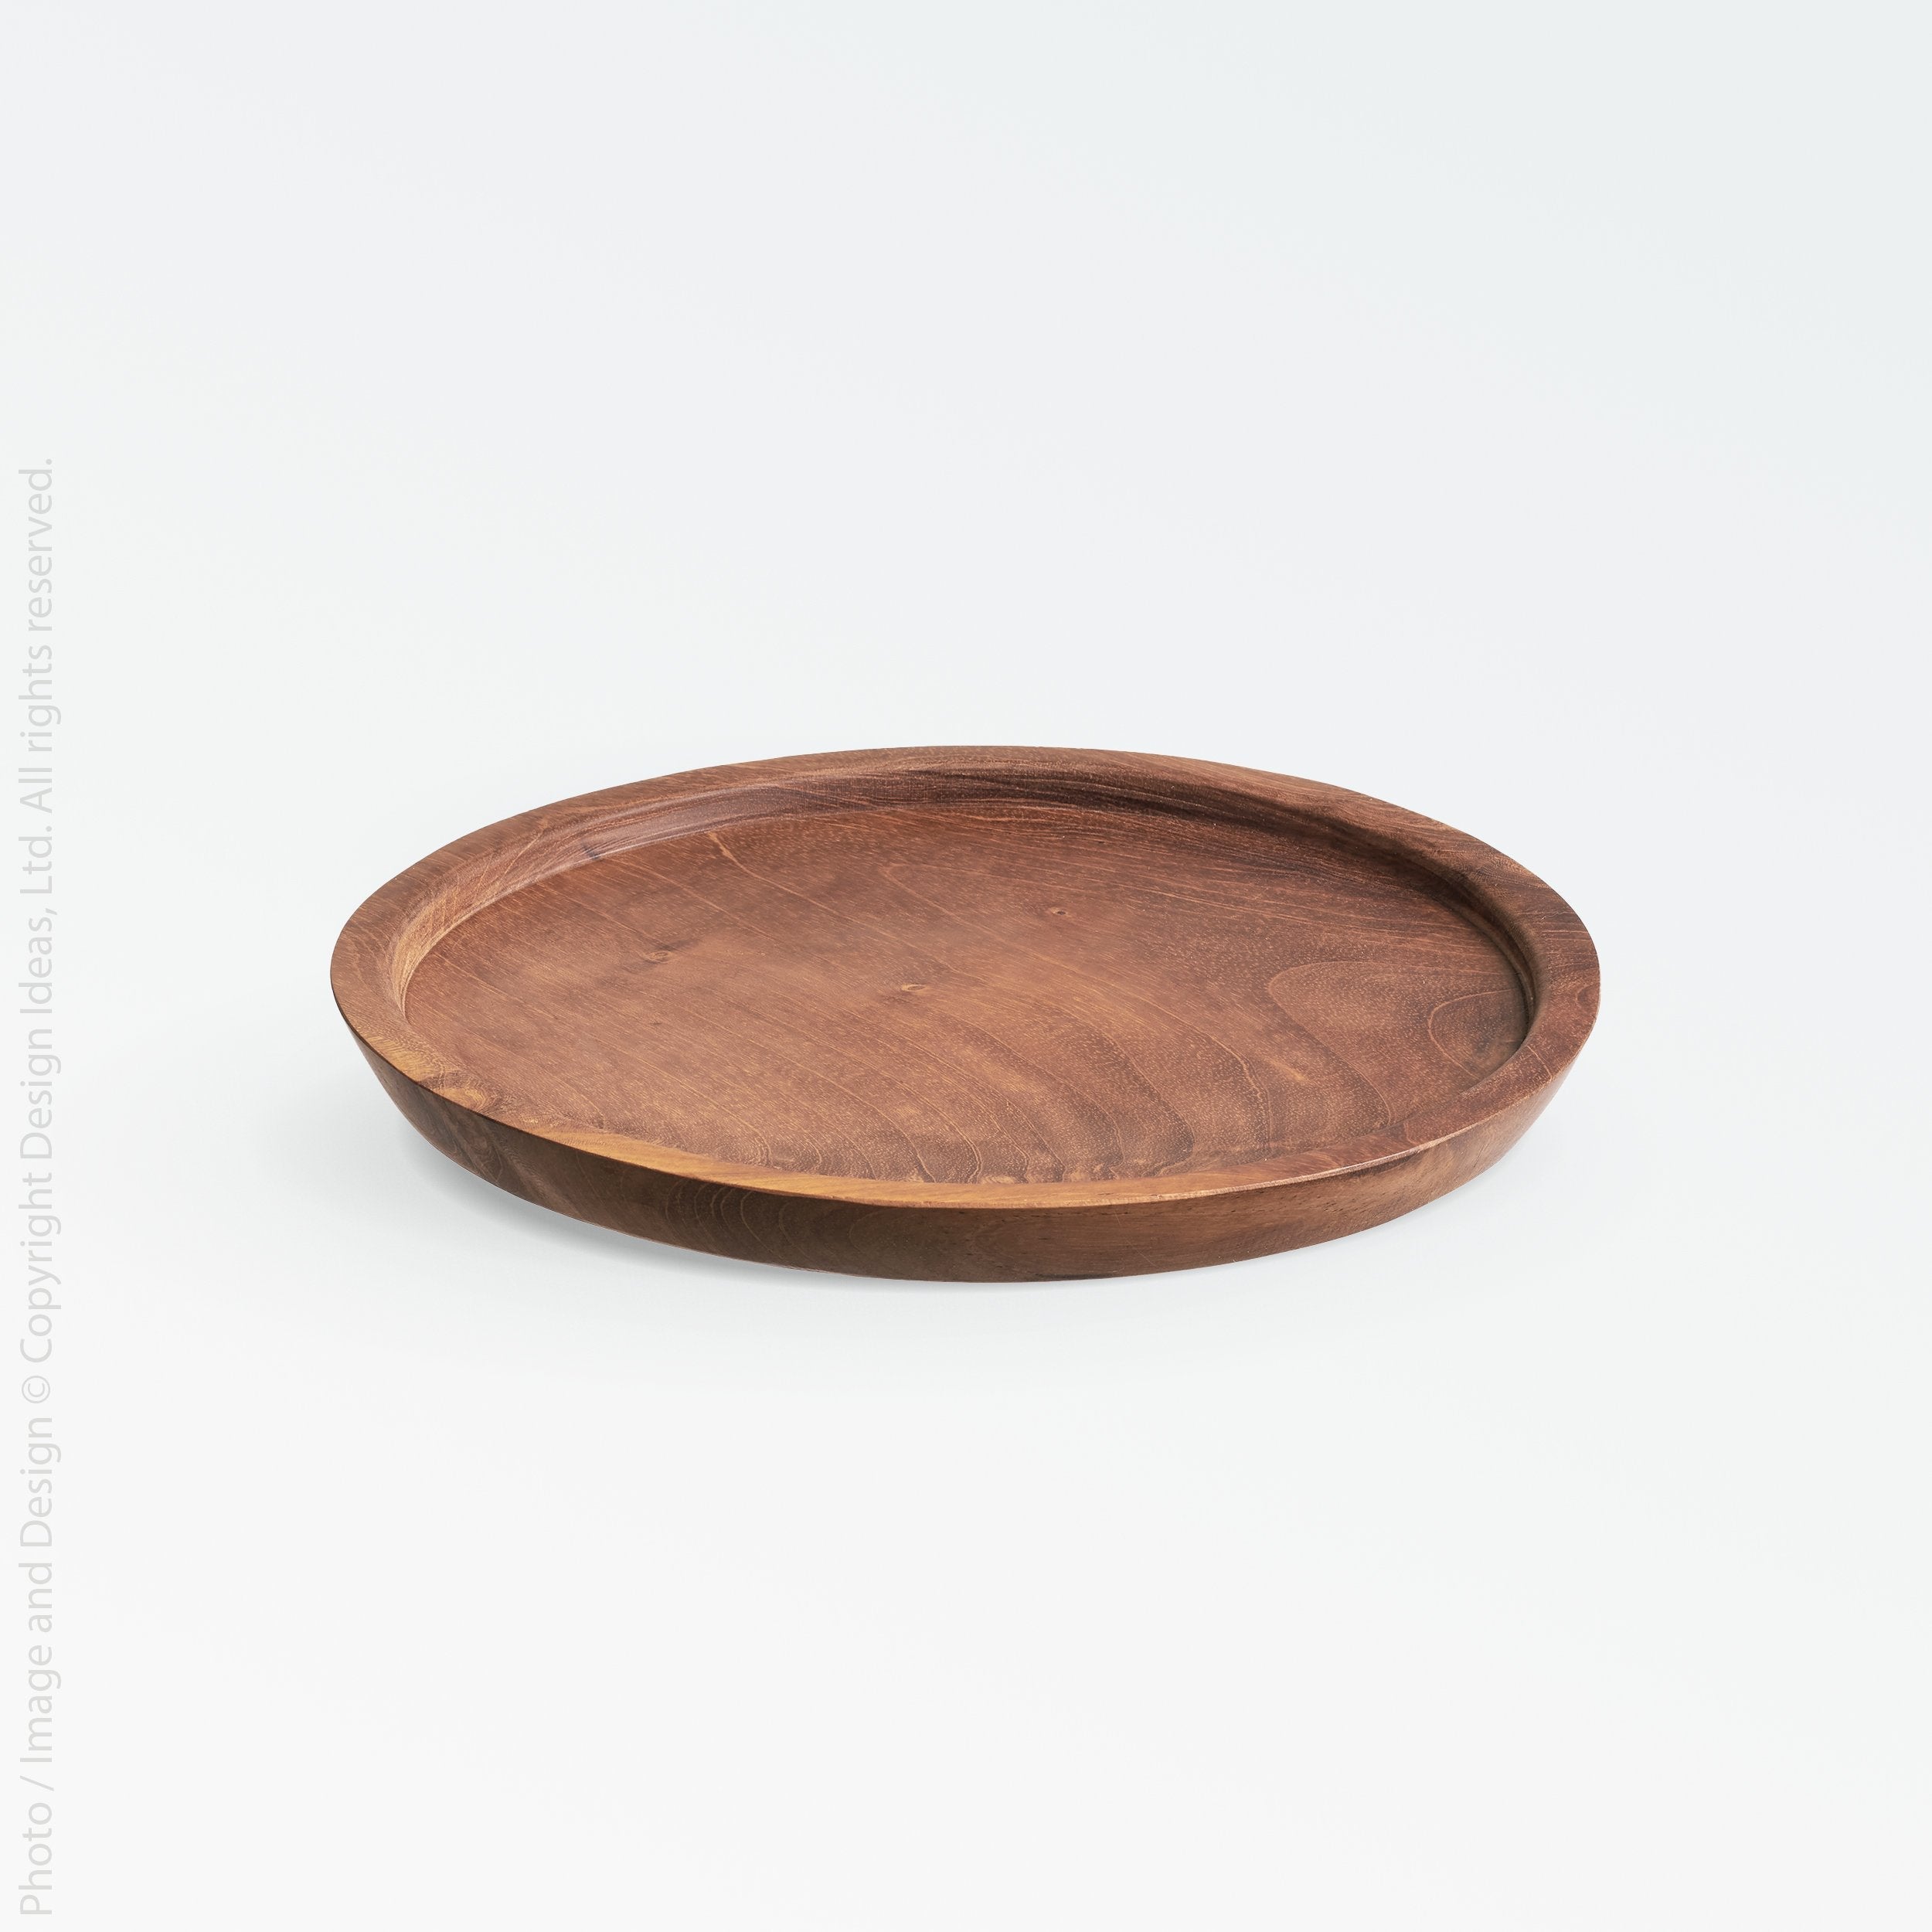 Chiku Teak Tray (Small) - Copper Color | Image 1 | From the Chiku Collection | Skillfully created with natural teak for long lasting use | This tray is sustainably sourced | Available in natural color | texxture home